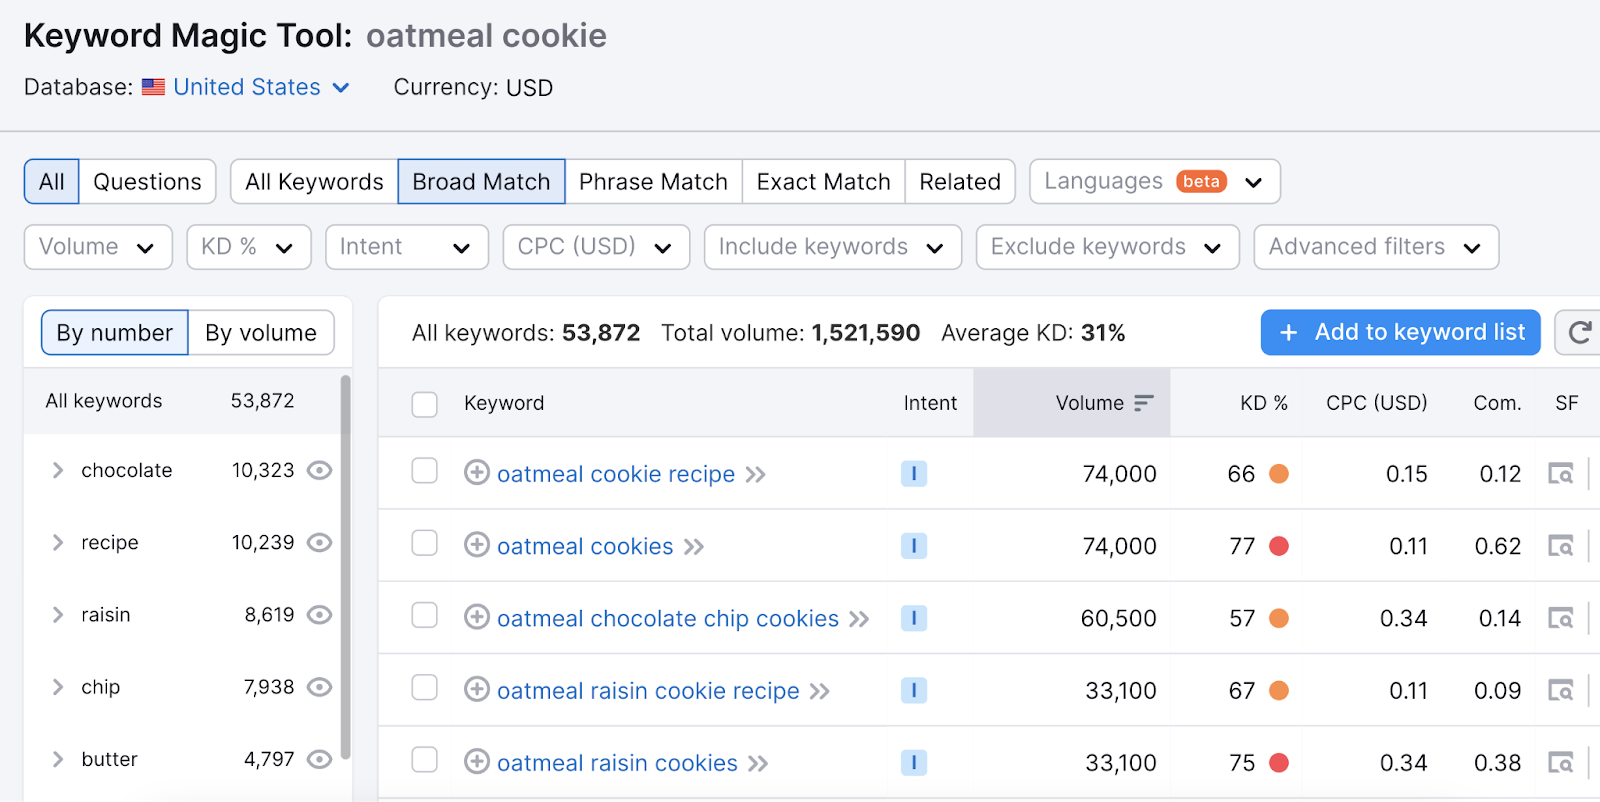 Keyword search results for "oatmeal cookie" are oatmeal cookie recipe, oatmeal chocolate chip cookies, oatmeal raisin cookies, and more